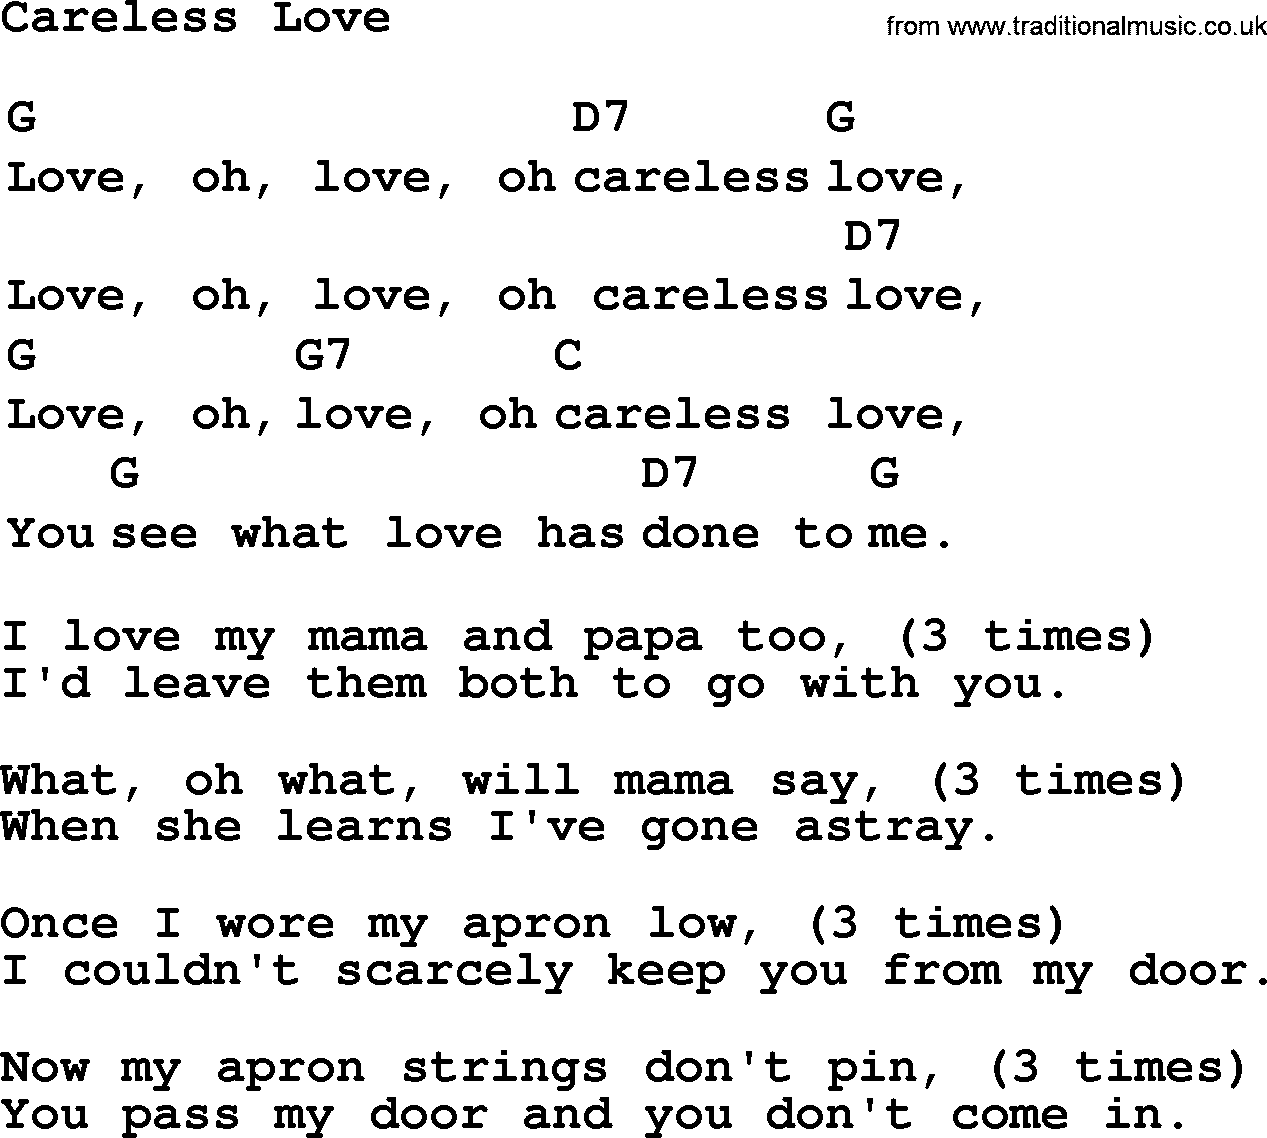 Top 1000 Most Popular Folk and Old-time Songs: Careless Love, lyrics and chords